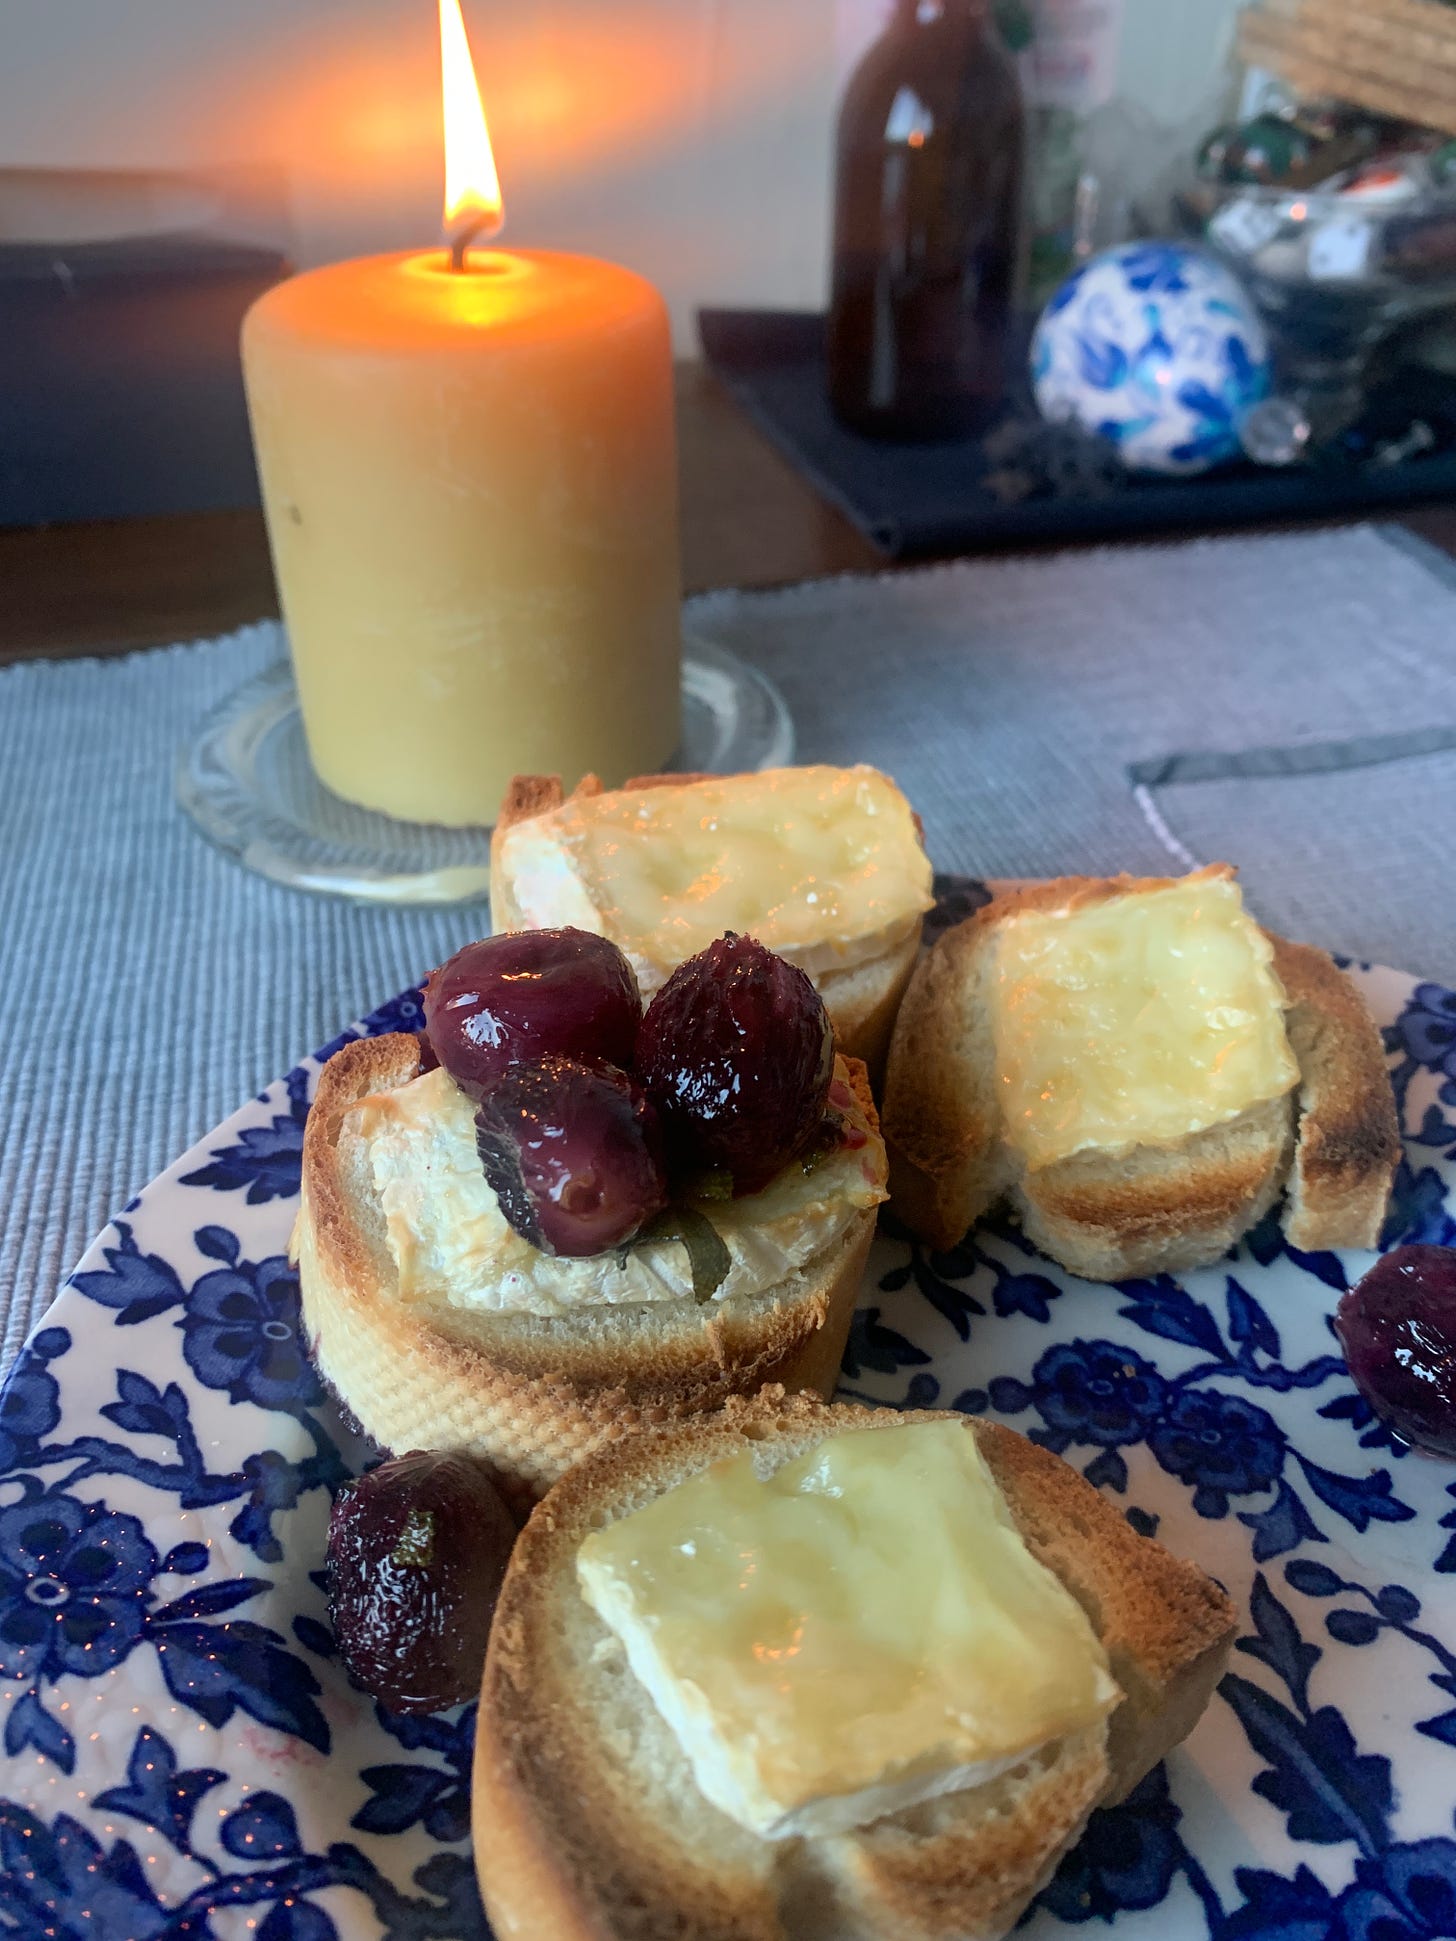 Melted brie on toasted baguette slices, topped with roasted grapes.